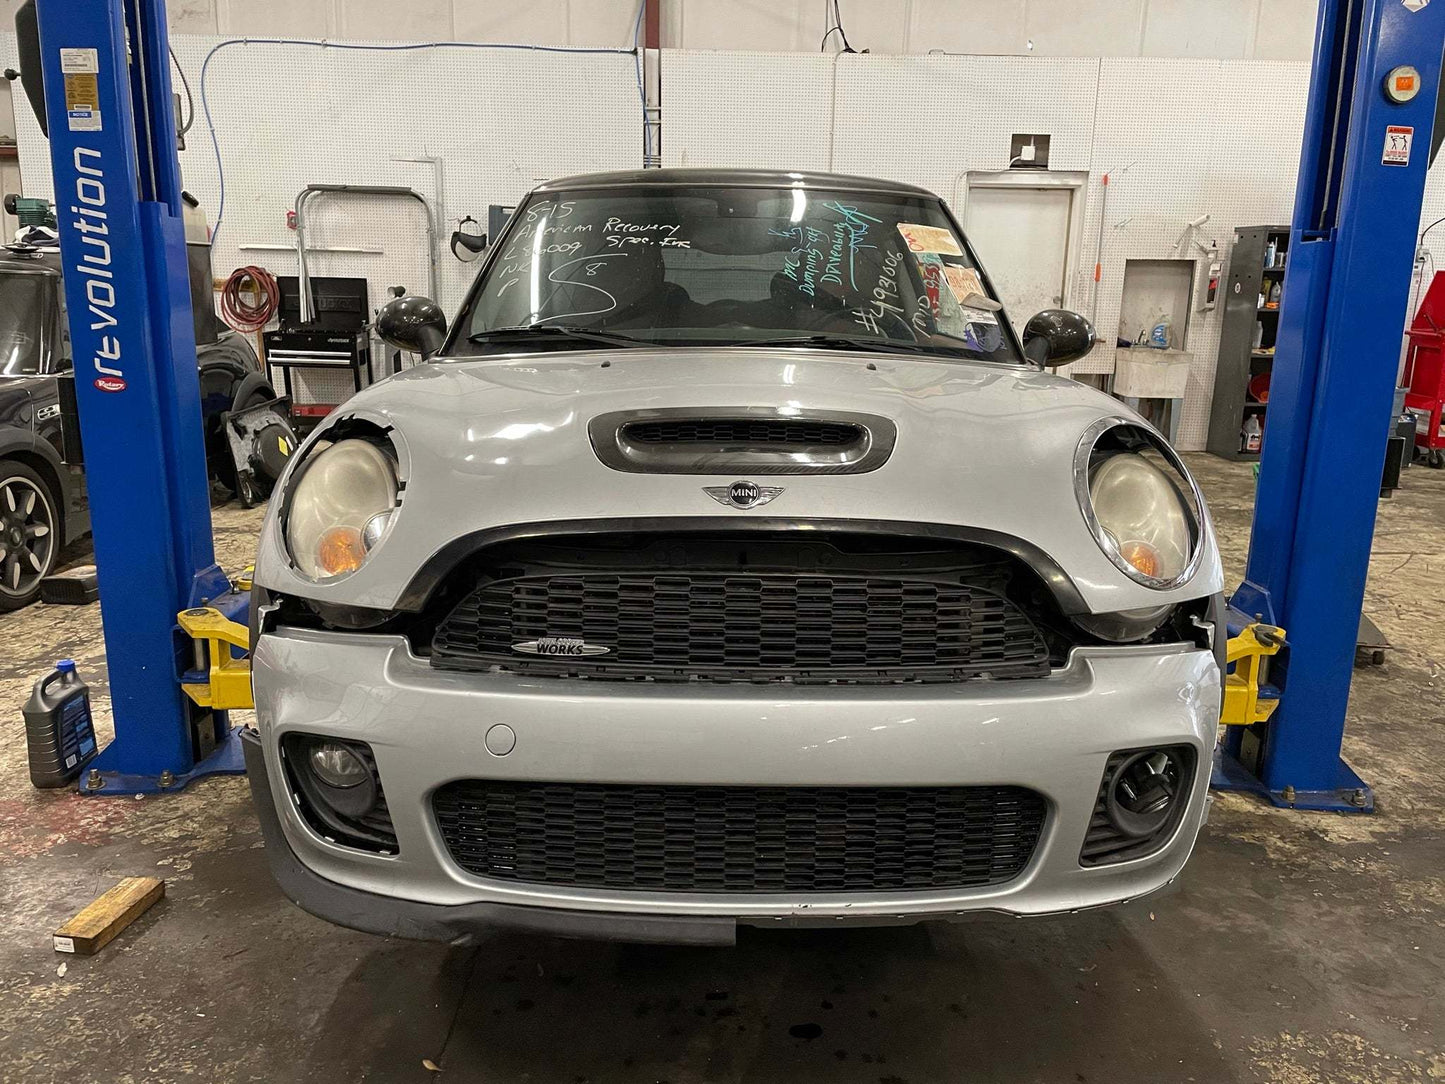 2007 MINI Cooper Hatchback S with JCW Tuning Kit, New Parts Car (March 2021) Stk # 227